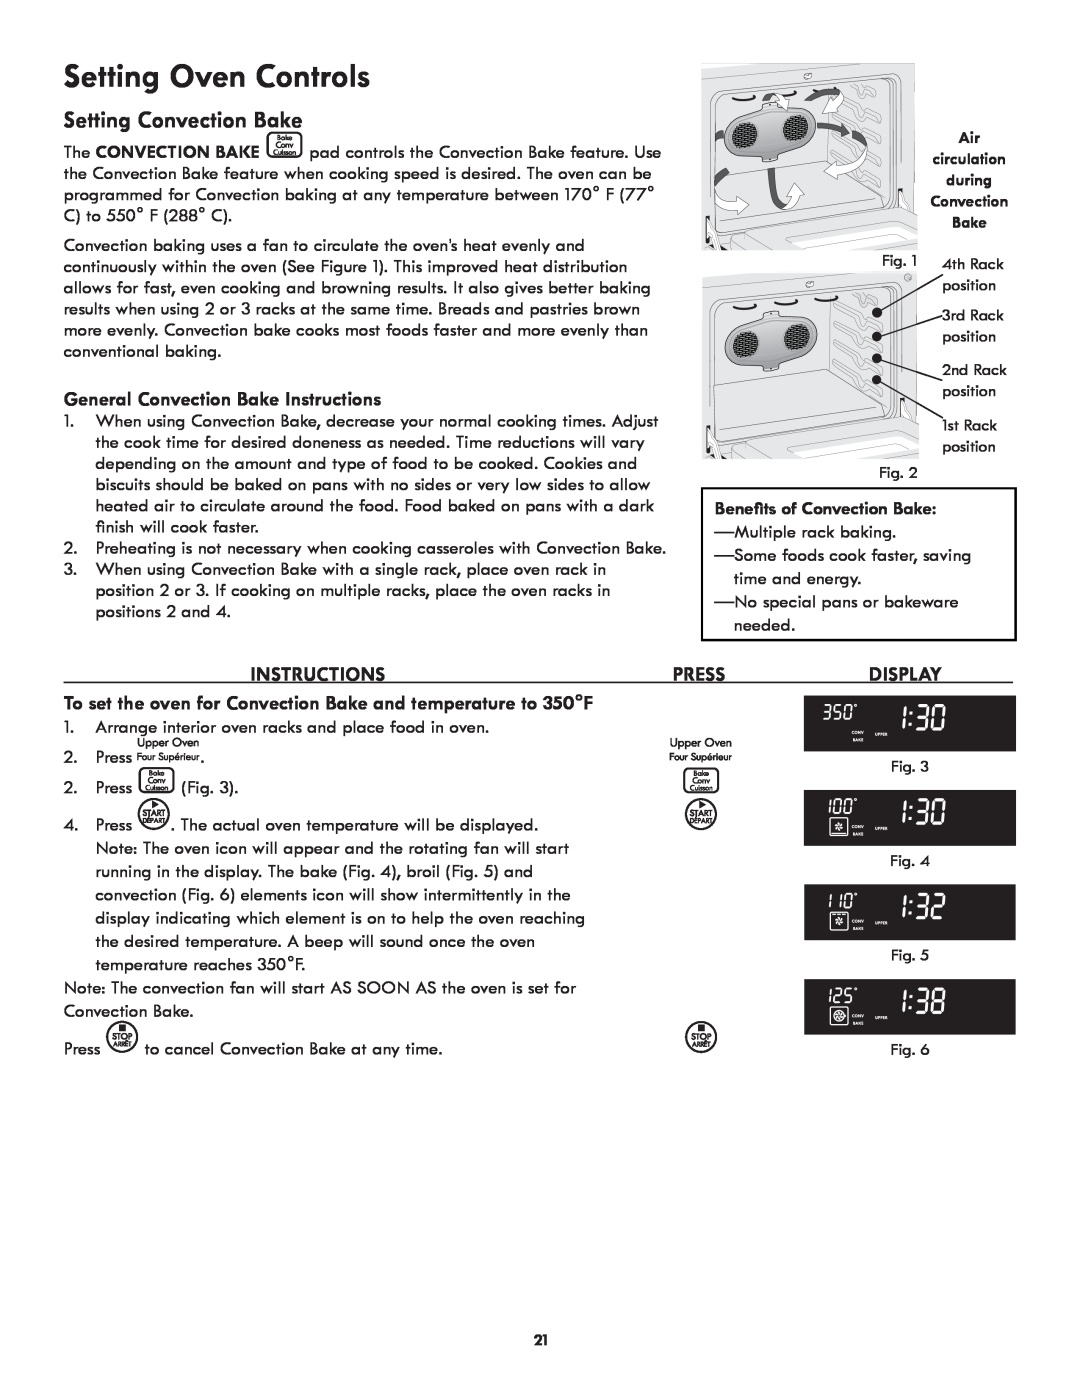 Kenmore 318205342A Setting Convection Bake, Setting Oven Controls, General Convection Bake Instructions, Press, Display 